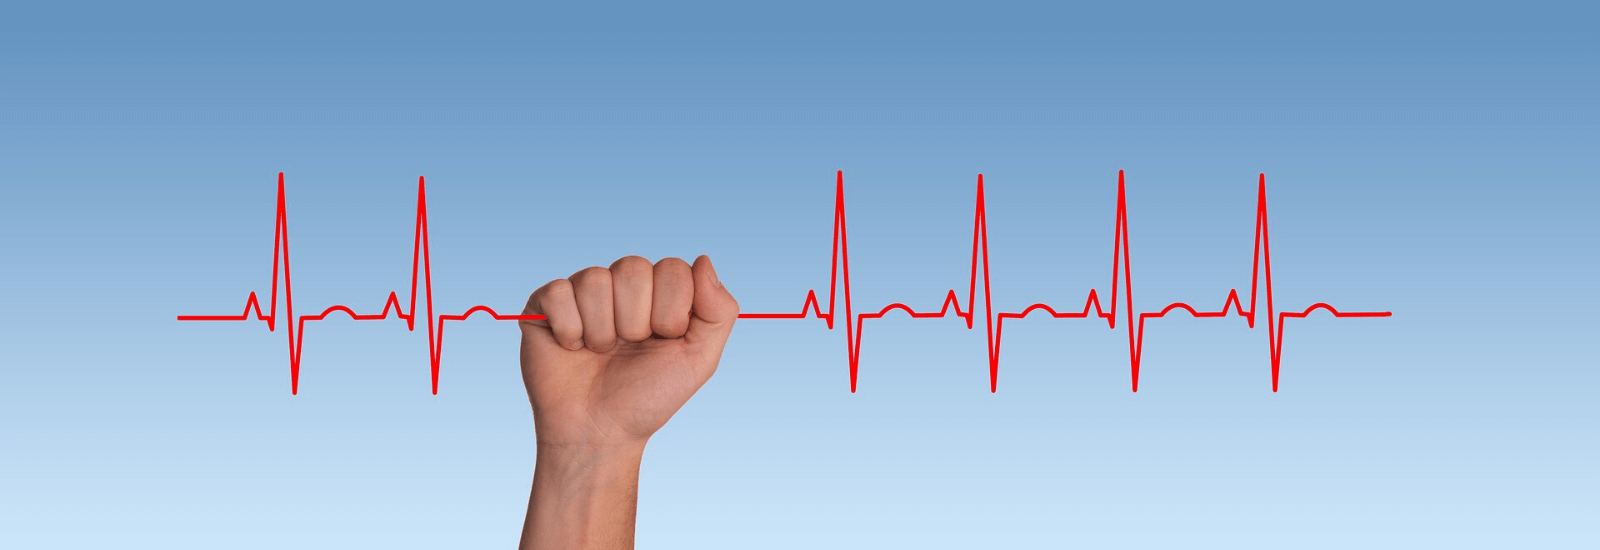 Heart Attack: Symptoms, Risks, Conditions, Treatment, and Prevention